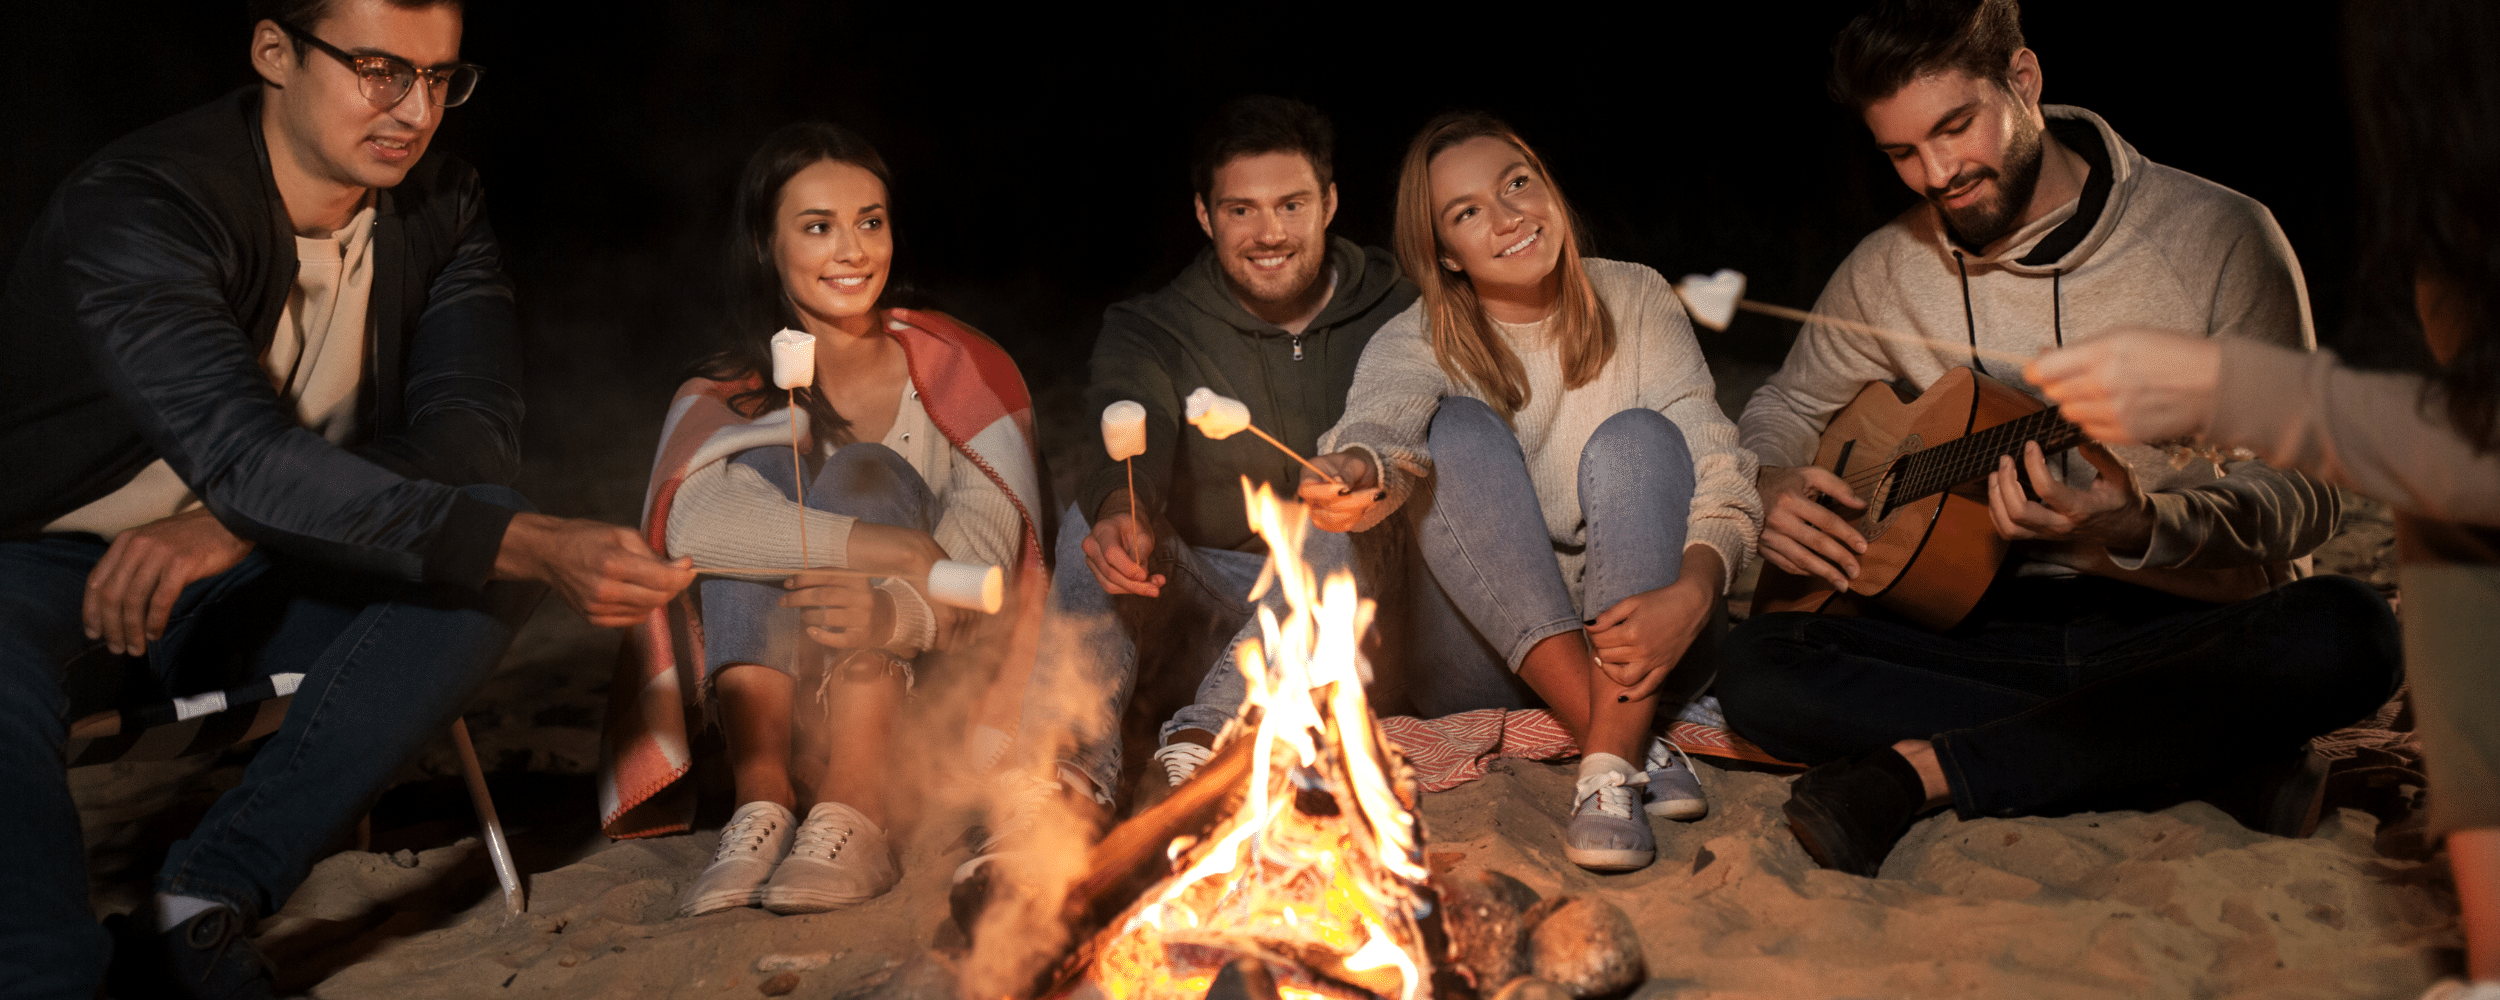 a group of youngsters enjoying bonfire and roasting marshmallows at the beach